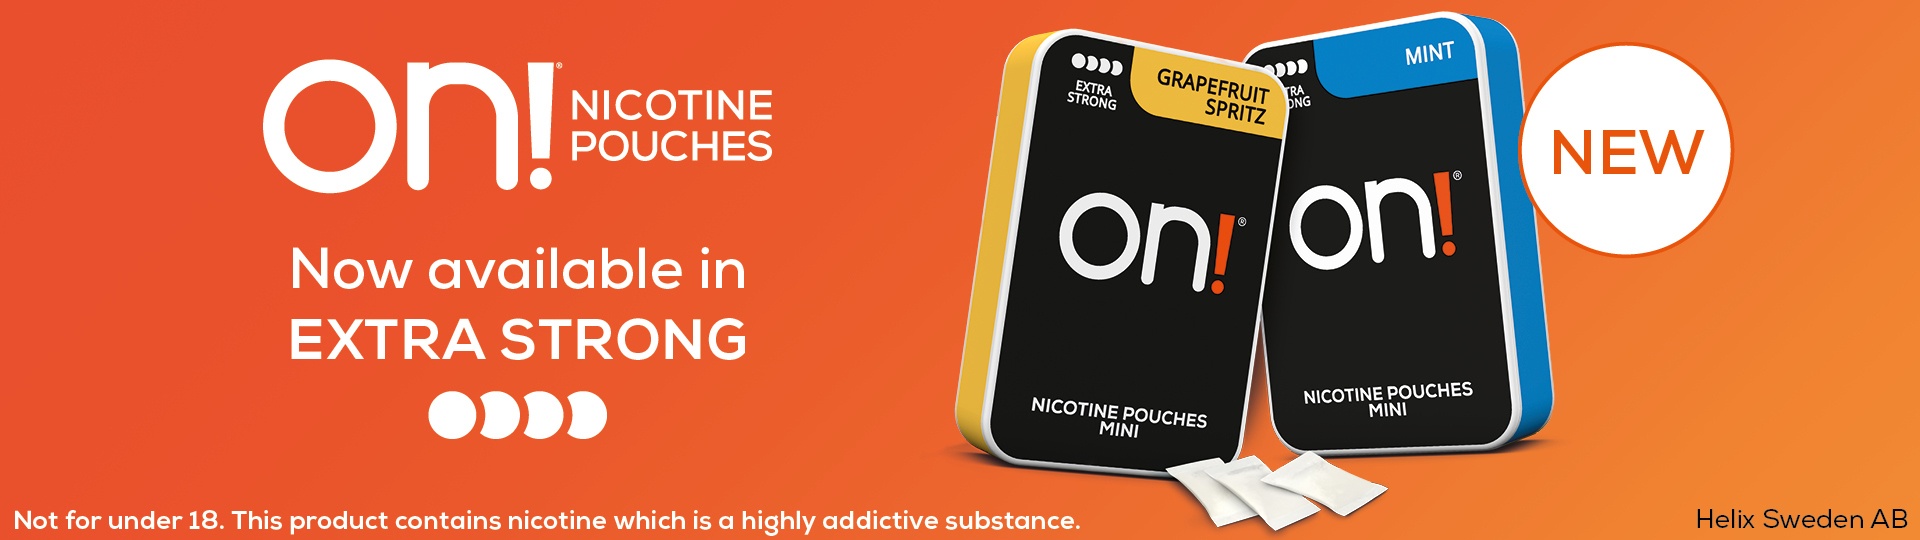 Nicotine Pouches in the UK - Buy Online